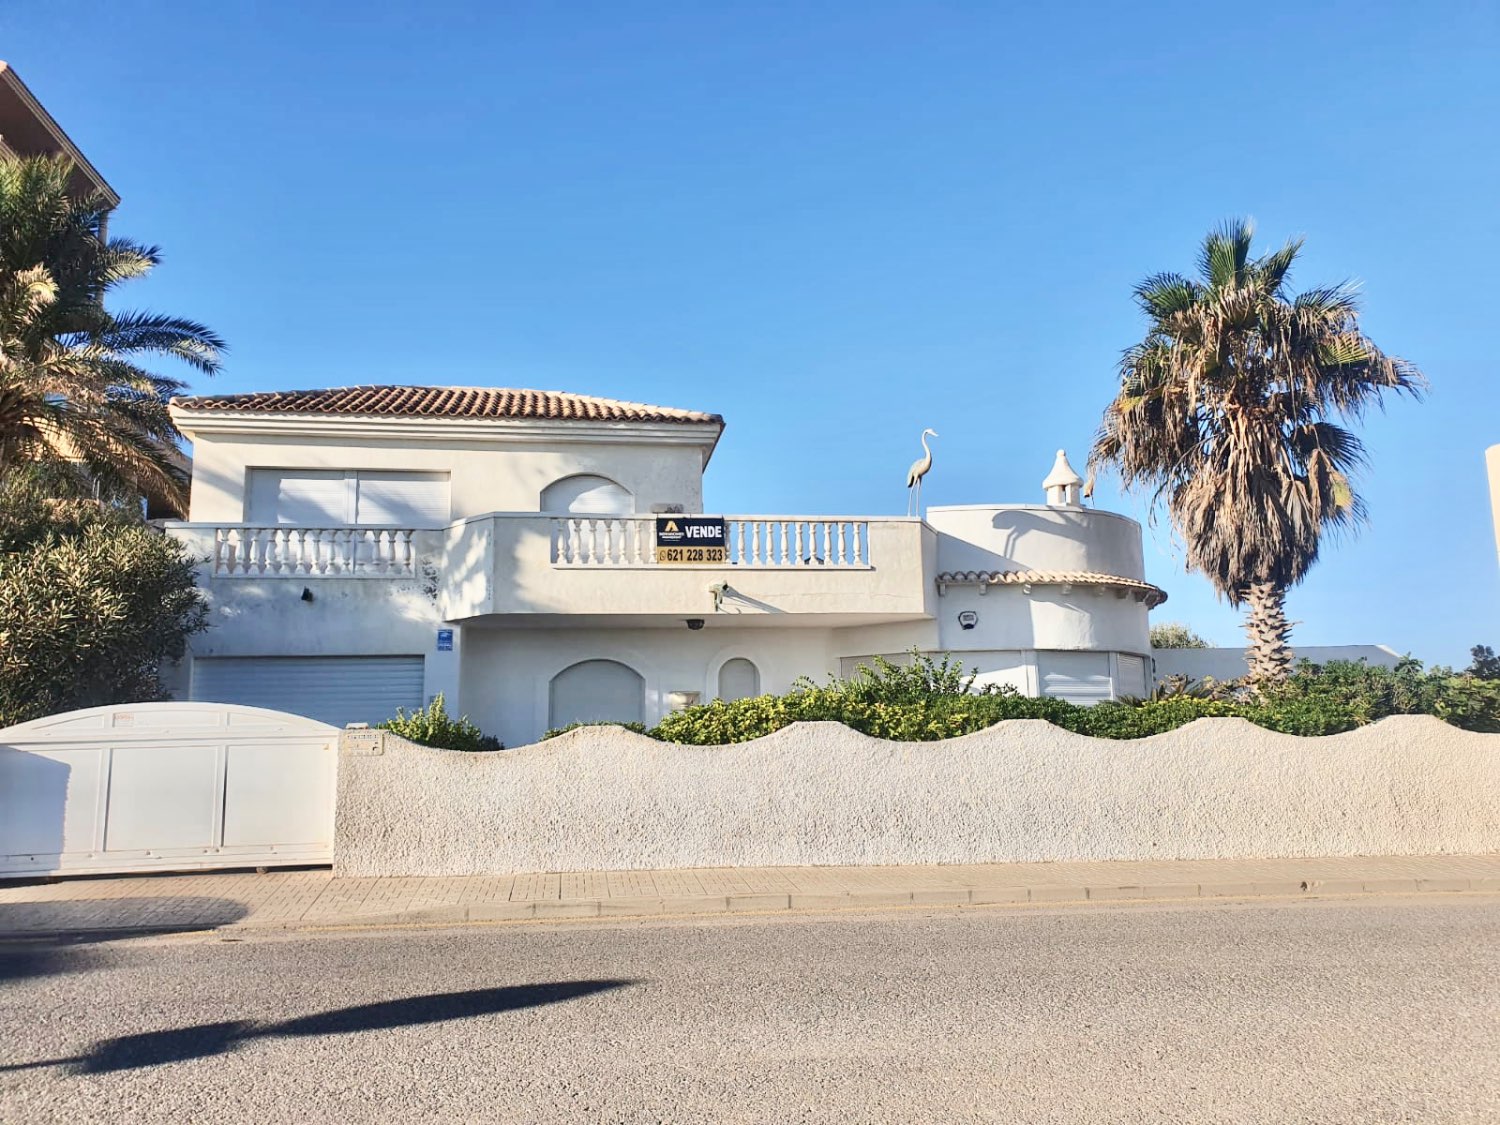 VILLA ON THE SEAFRONT OF THE MEDITERRANEAN